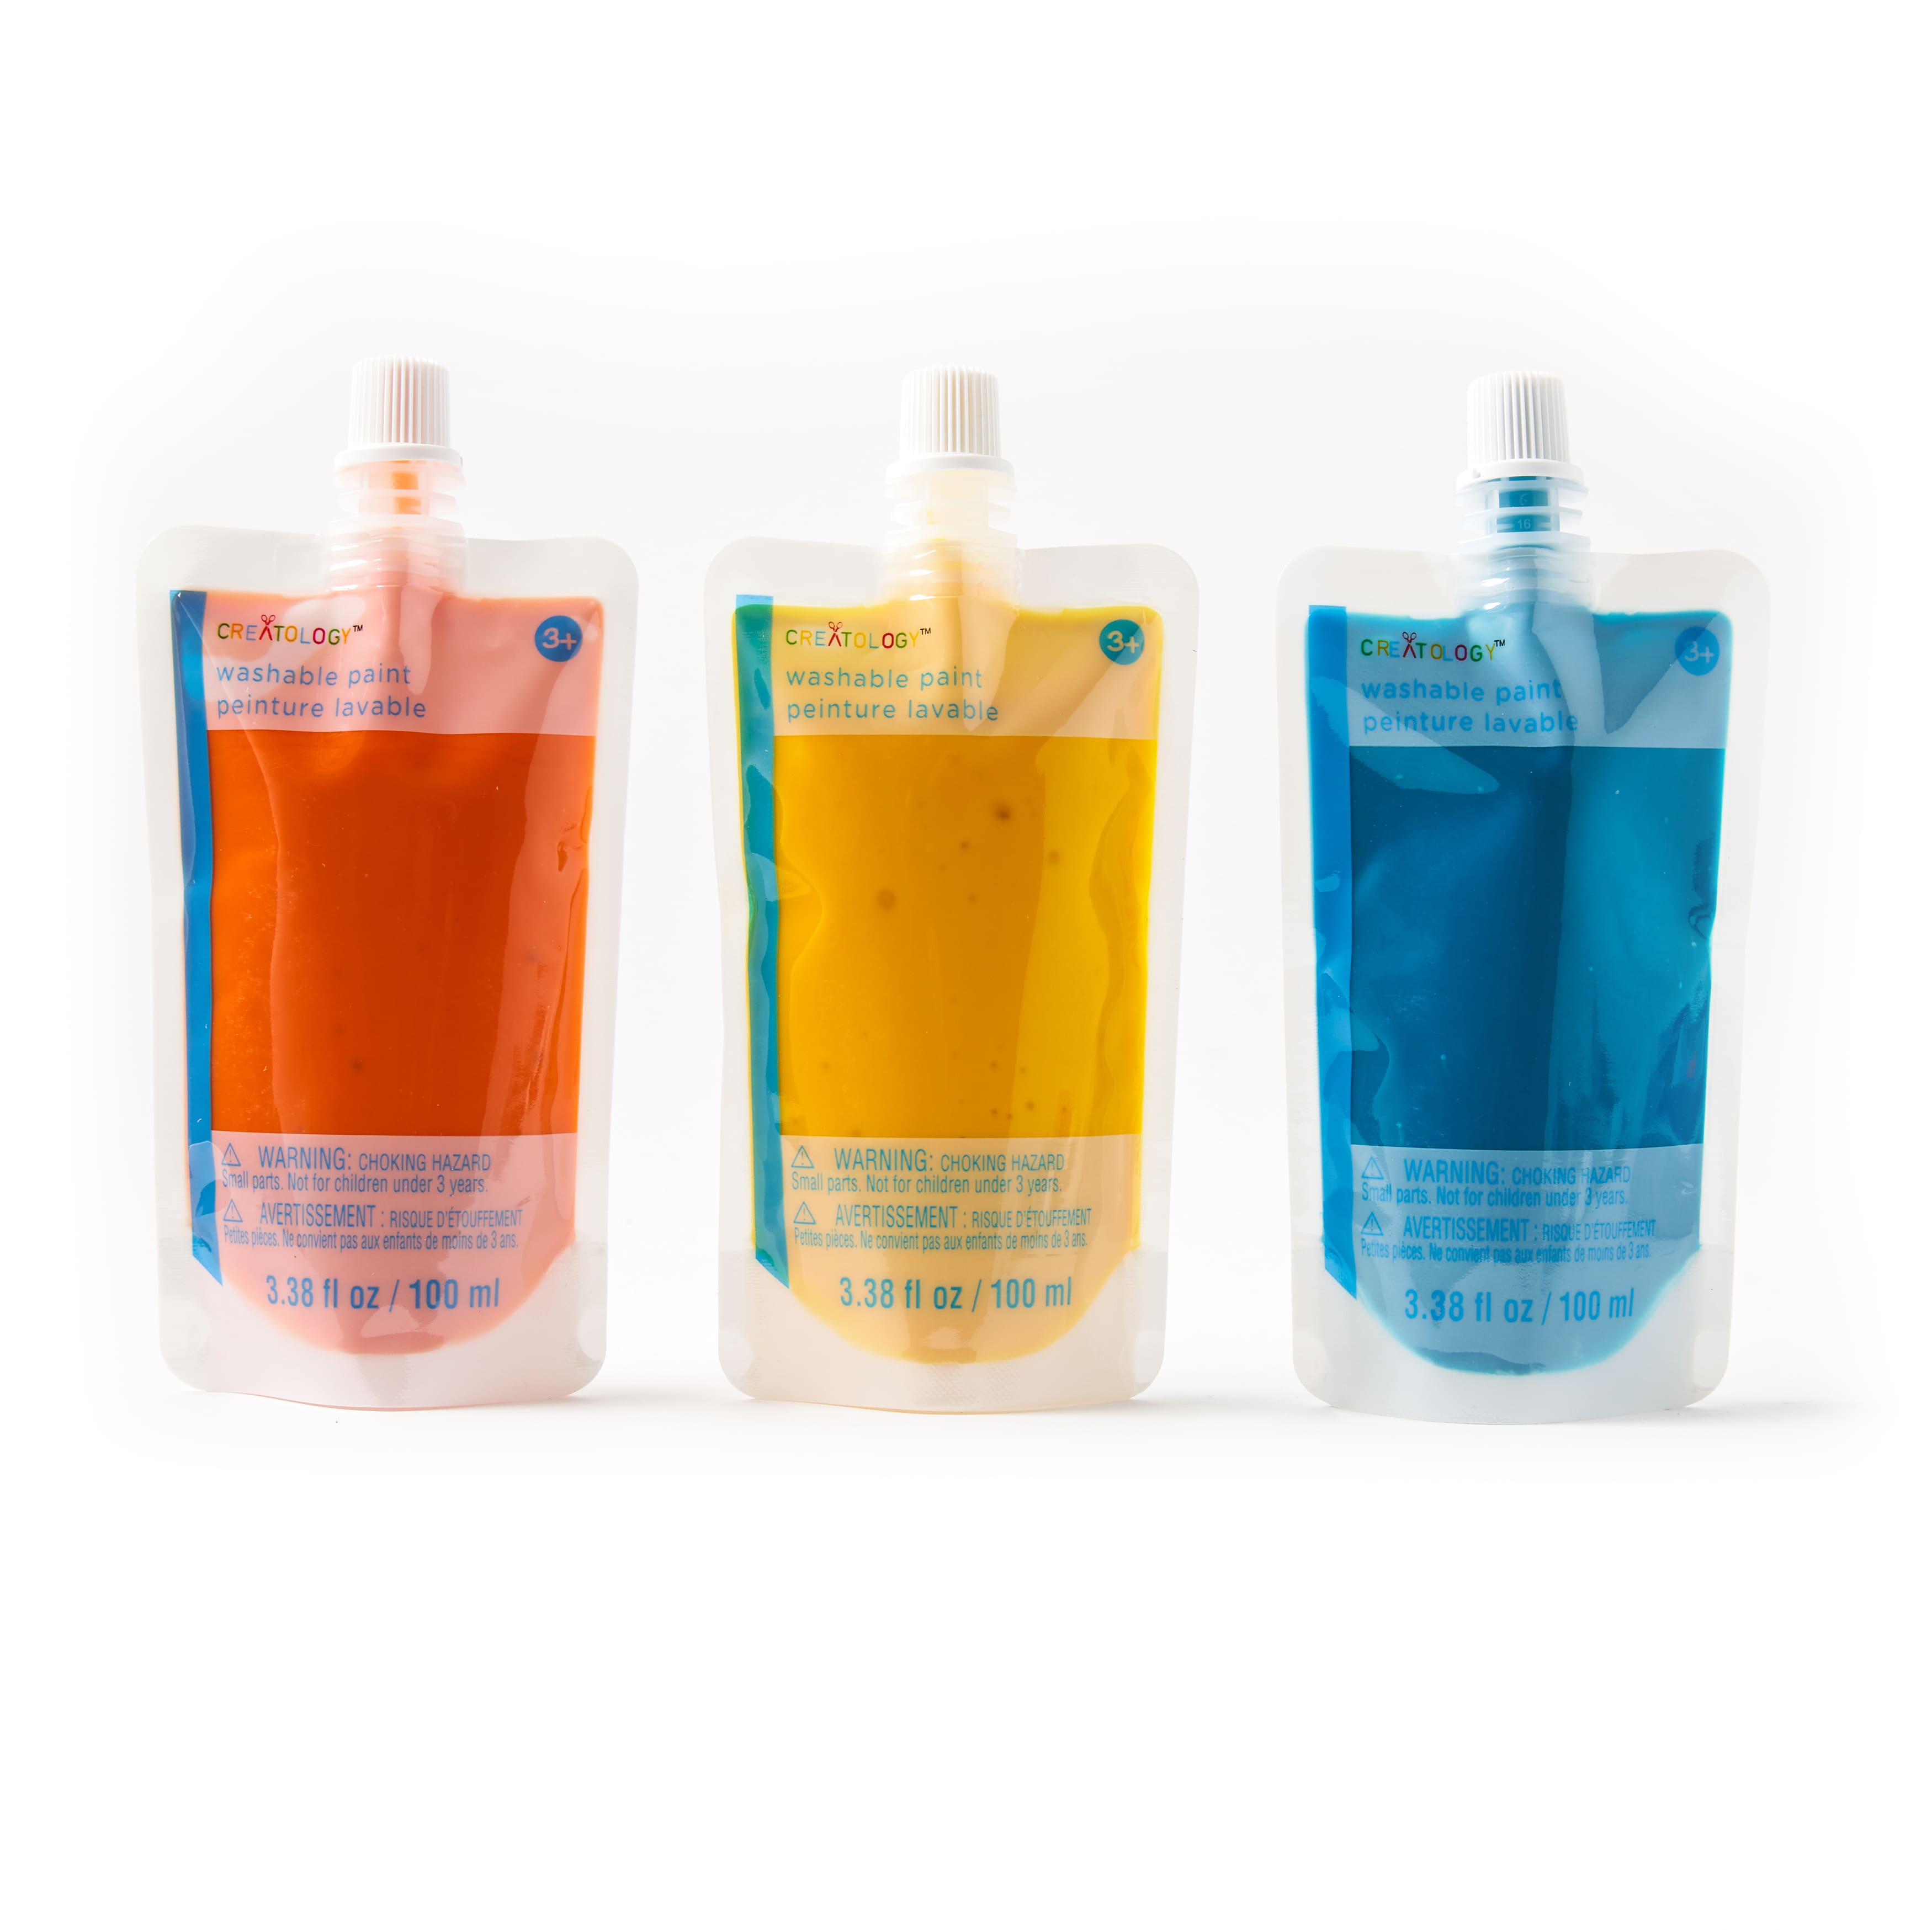 Primary Colors Washable Paint Set by Creatology™